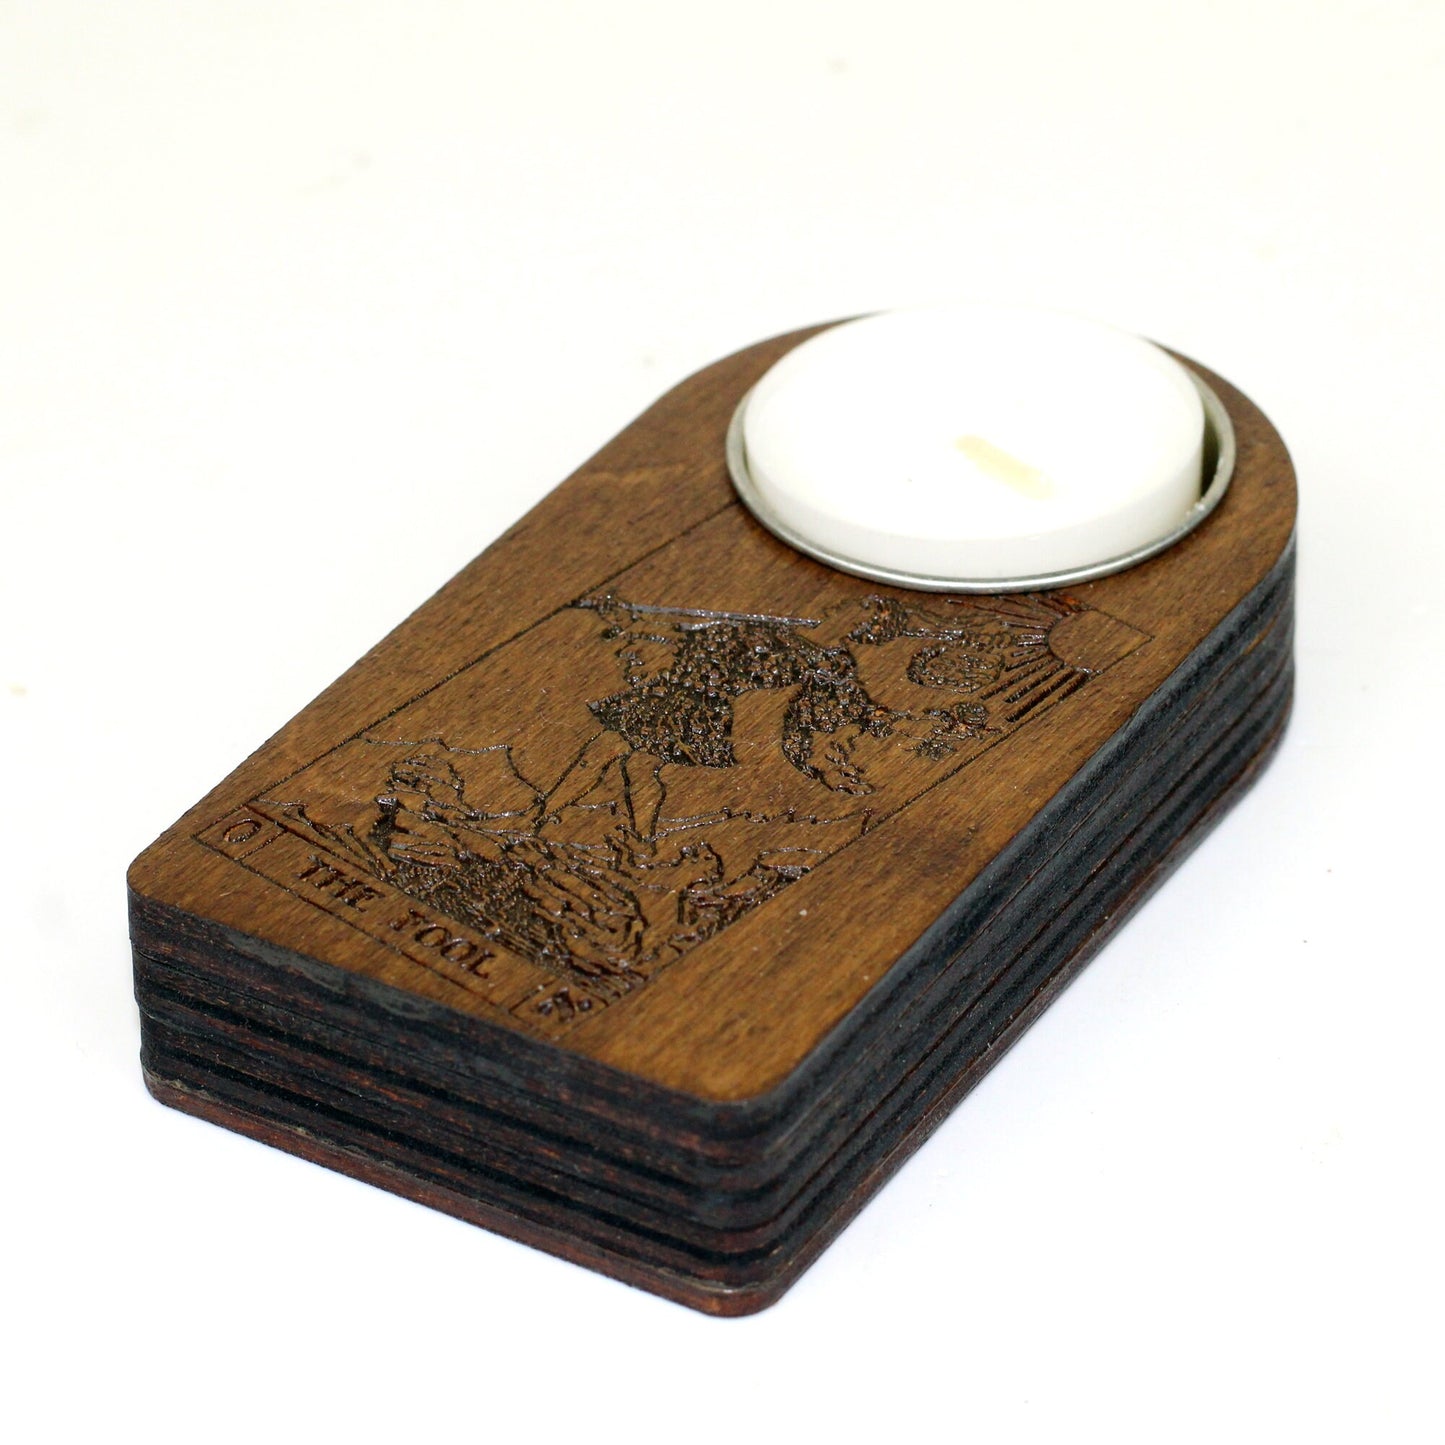 Engraved wooden candle holder with The Fool Tarot card and secret compartment, it holds tea light candle or nightlight, great gothic gift